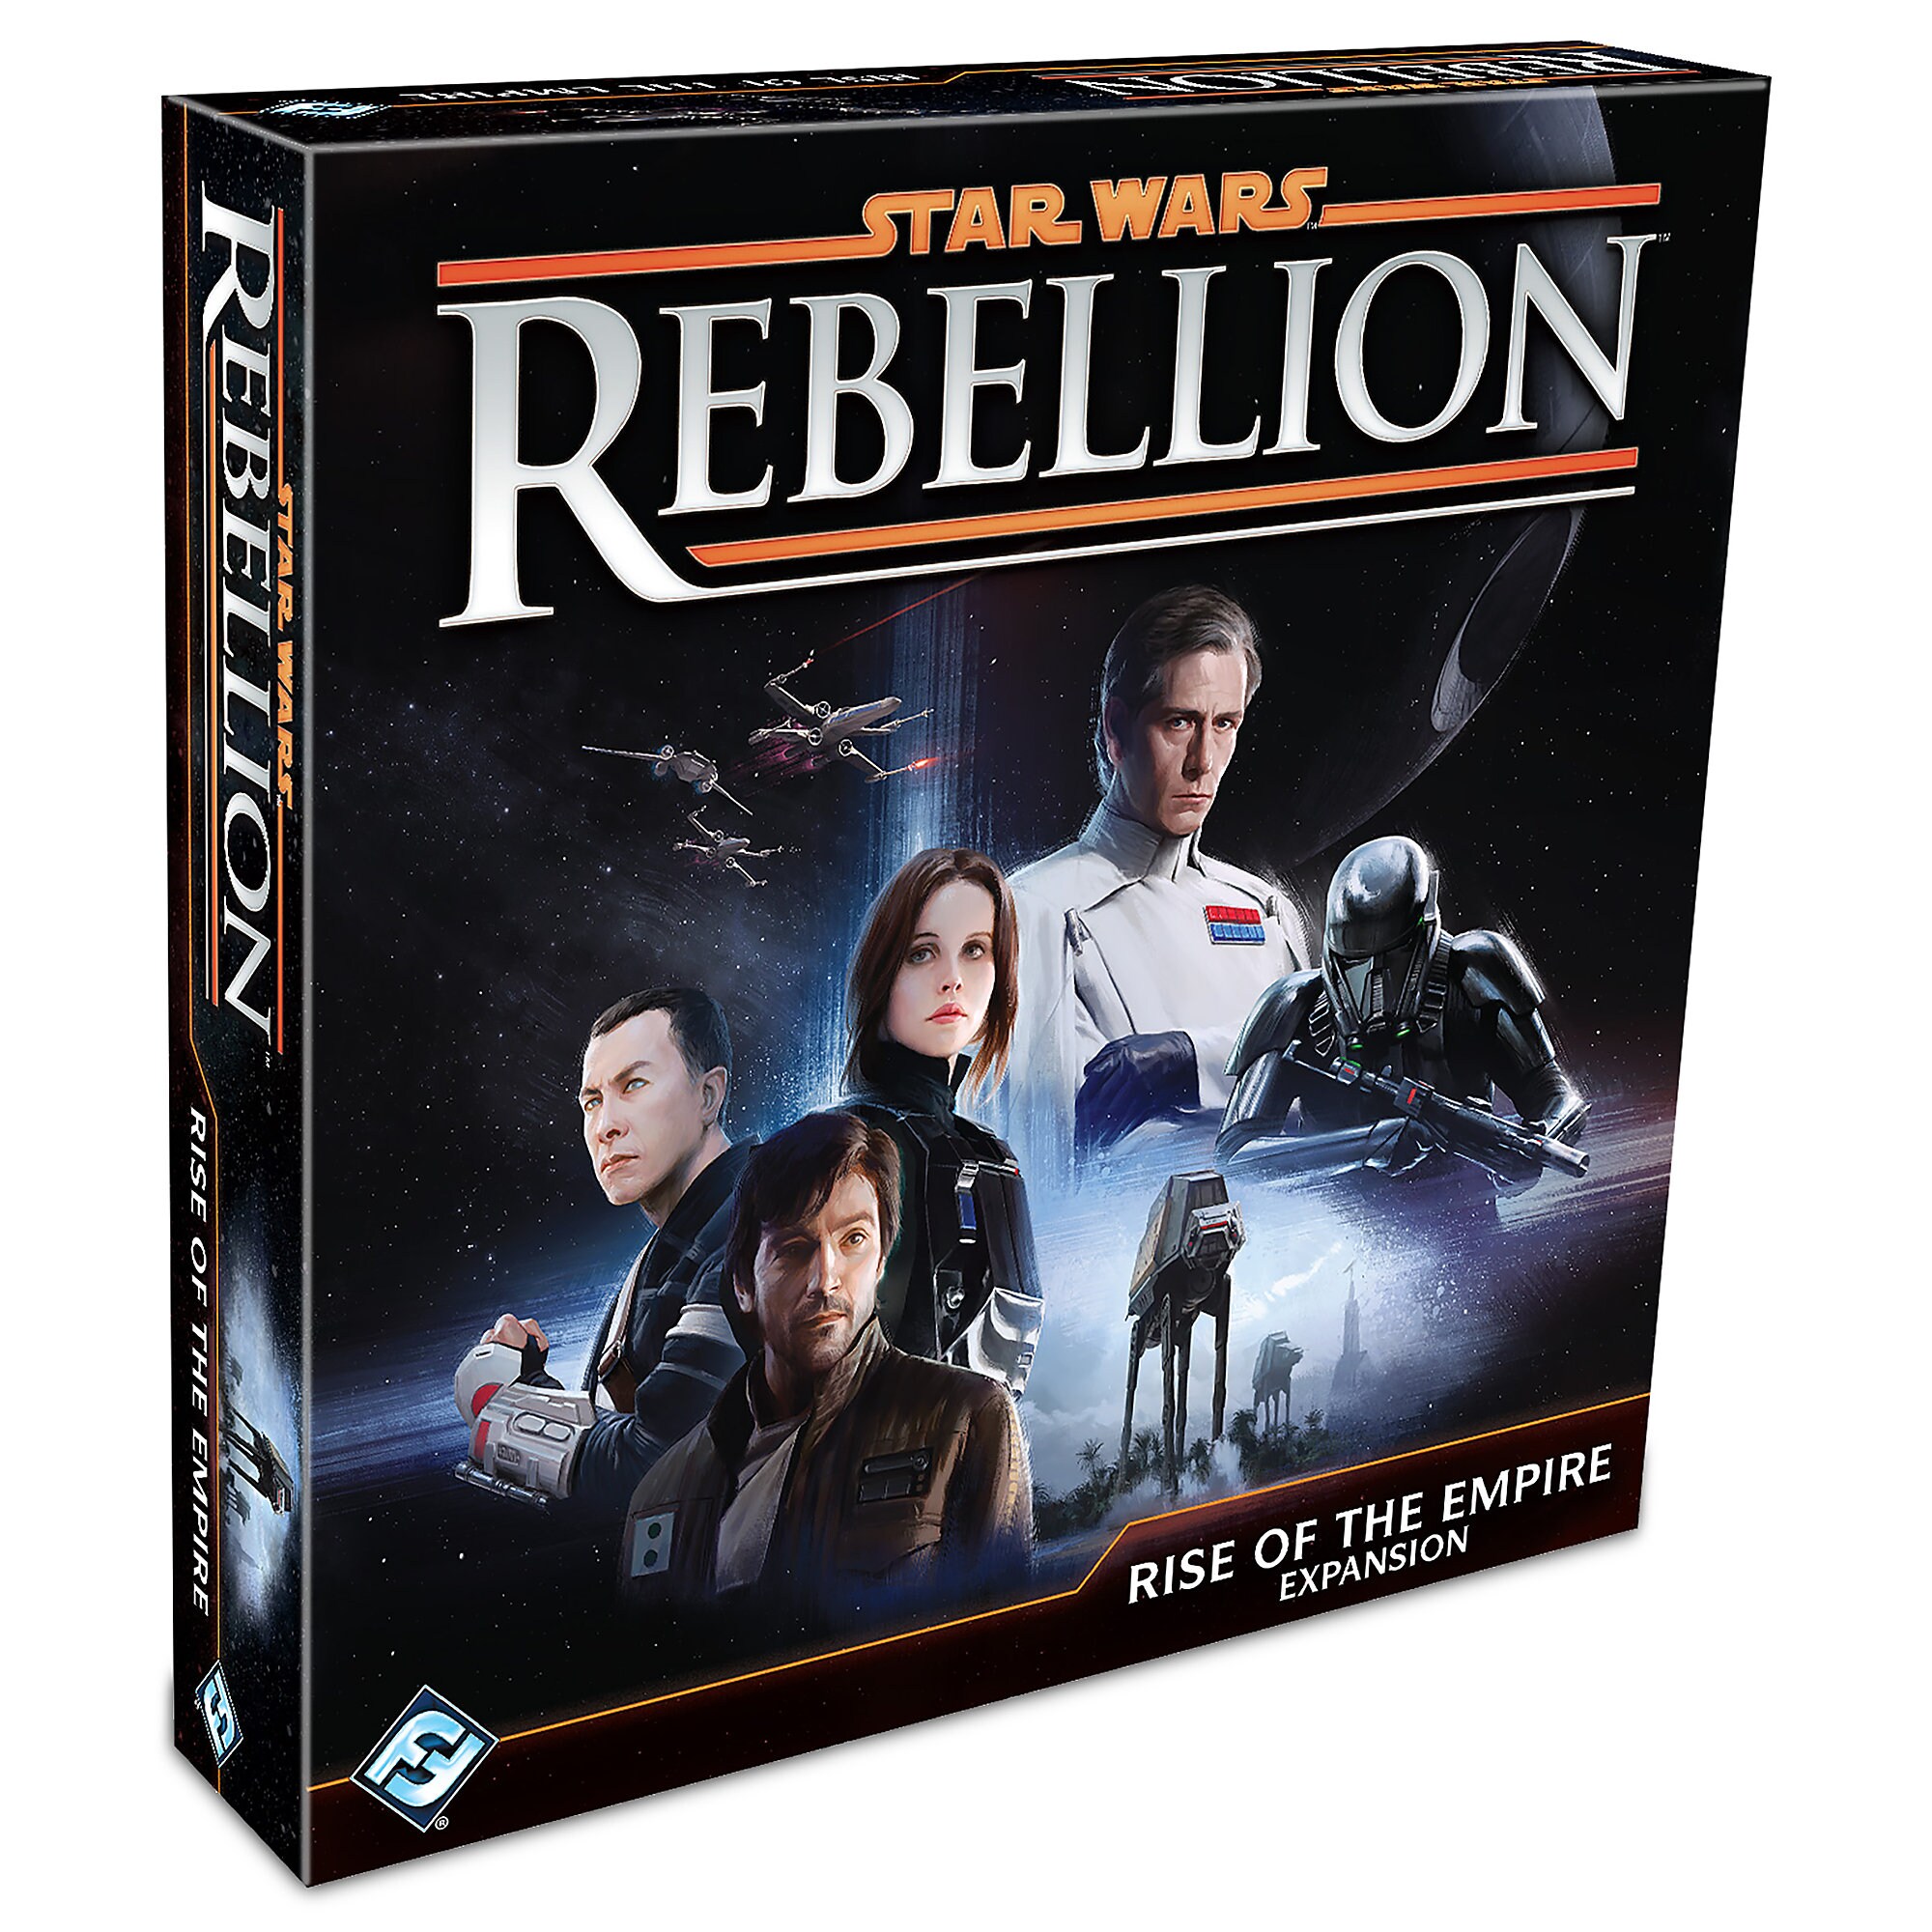 Star Wars: Rebellion Board Game - Rise of the Empire Expansion